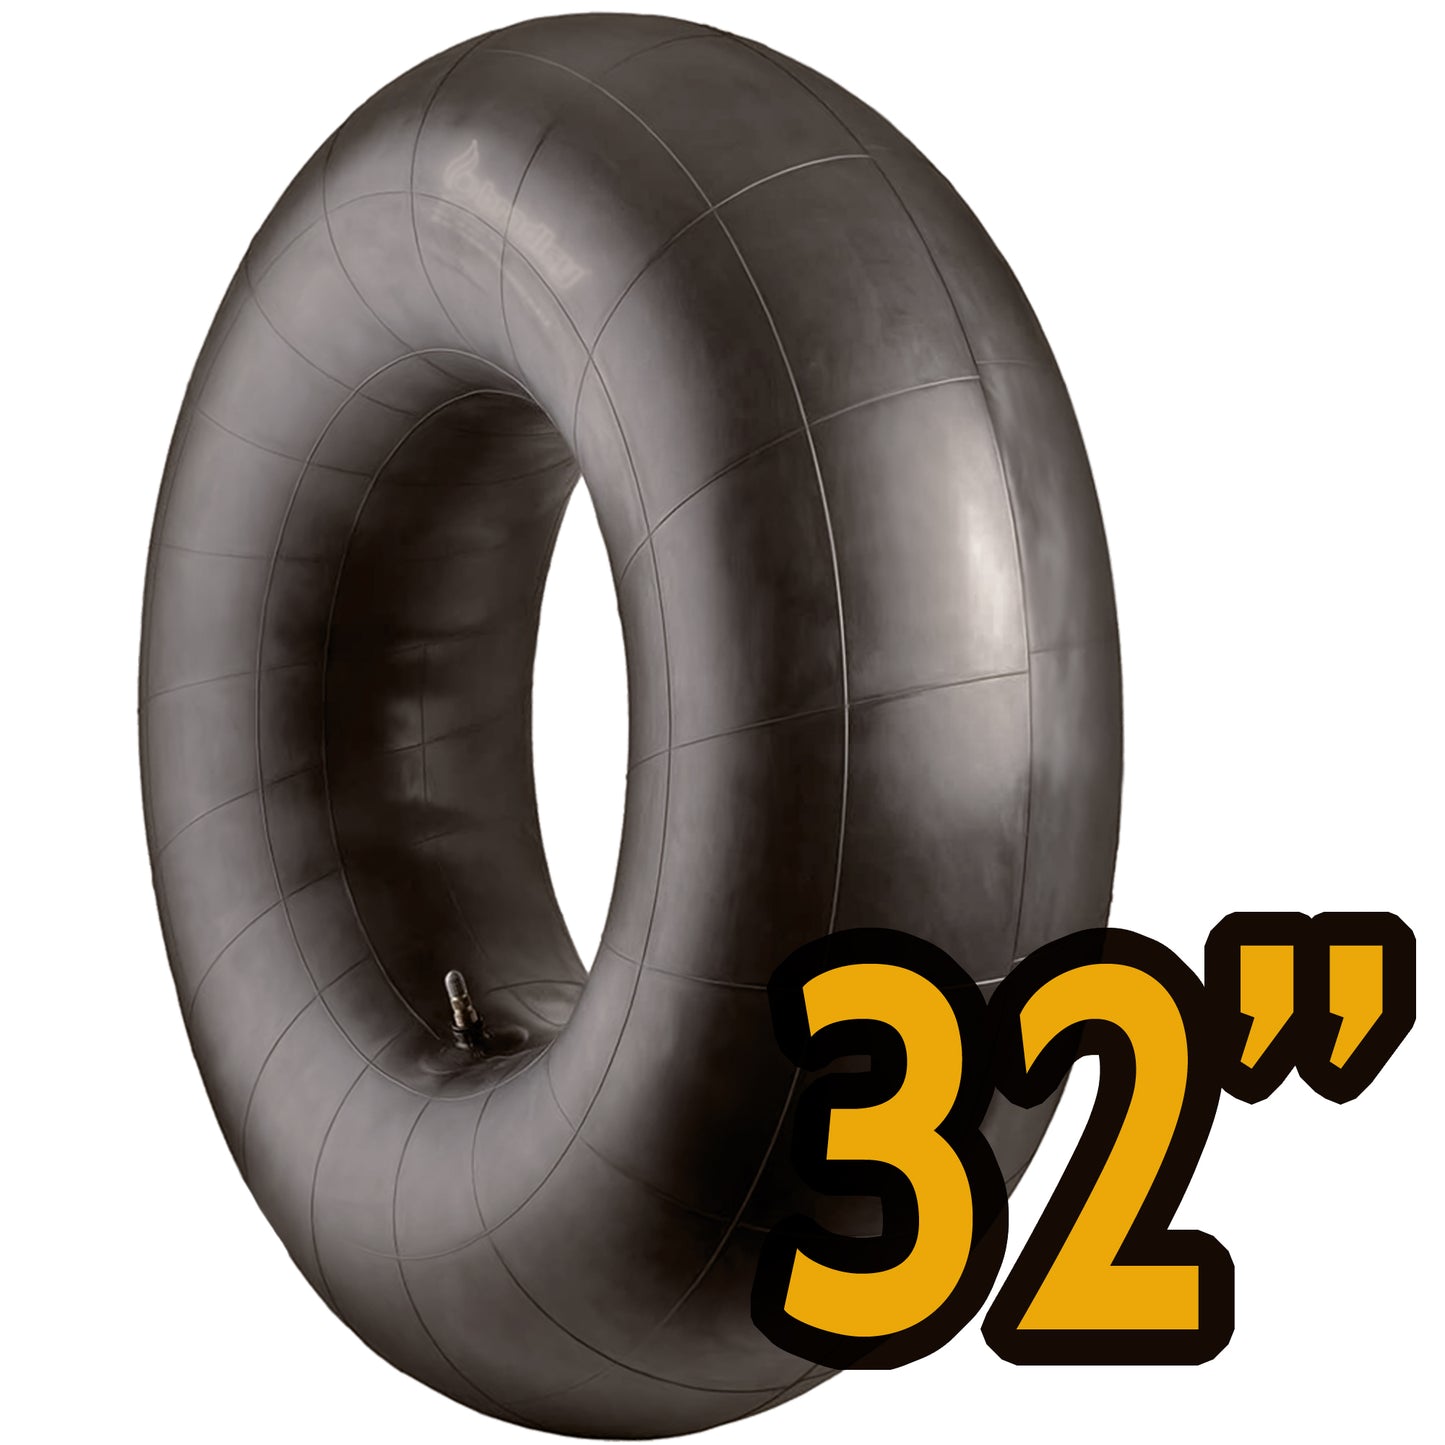 Bradley Heavy Duty Rubber Inner Tube for Floating River | Snow Tube; Heavy duty pool float for kids; pool tube closing; large lake floats for kids (32 inch inflated)